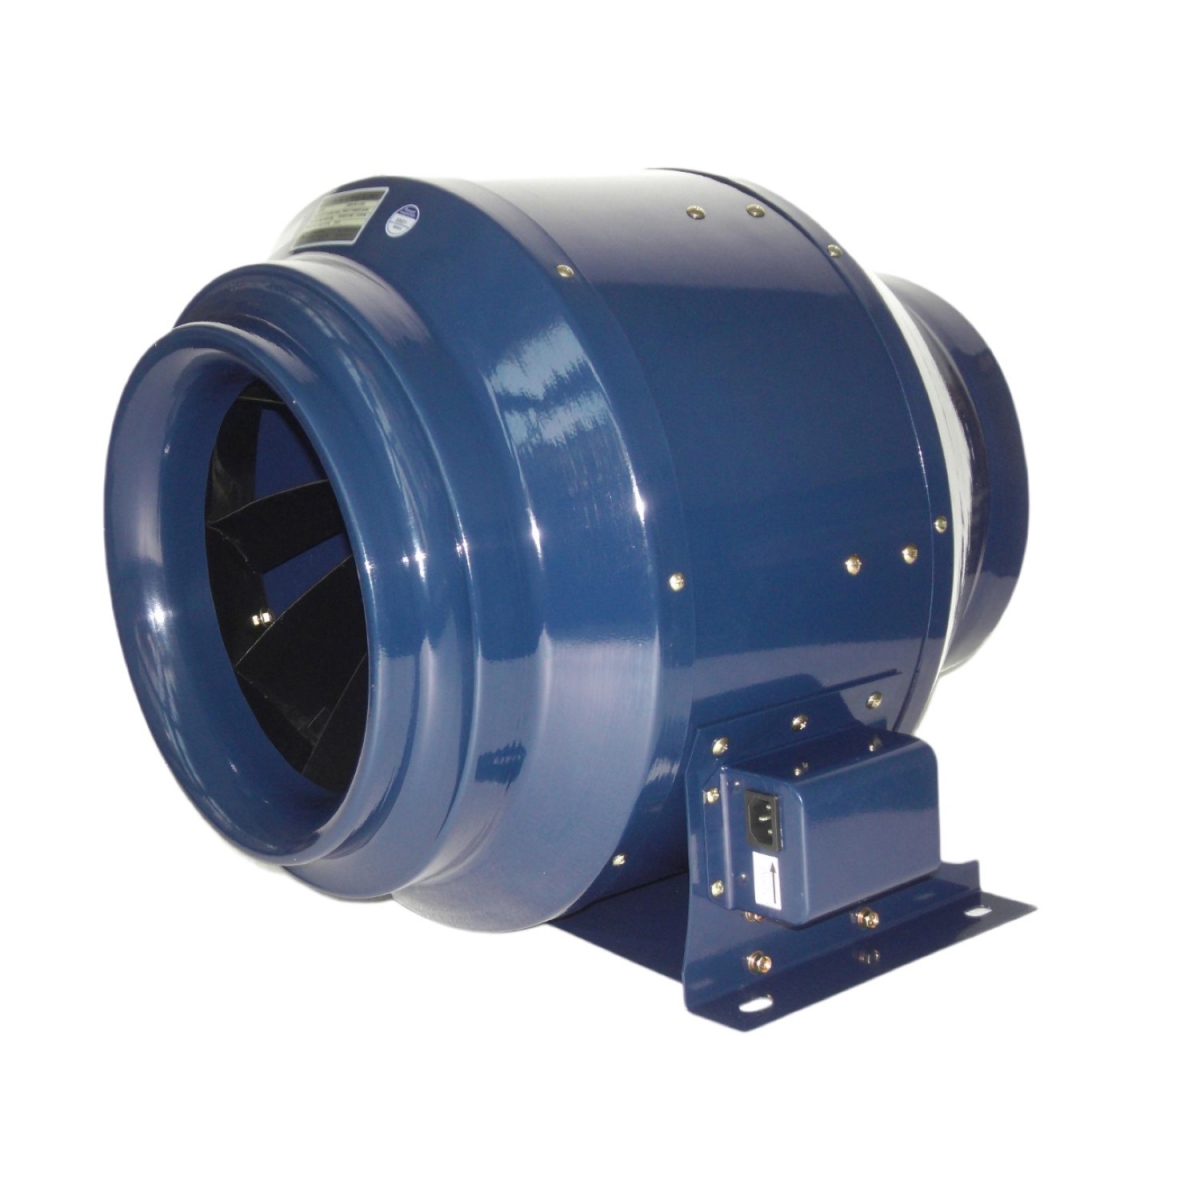 Industrial axial flow fans and centrifugal fans are the most popular ones .-SUNLIGHT BLOWER,Centrifugal Fans, Inline Fans,Motors,Backward curved centrifugal fans ,Forward curved centrifugal fans ,inlet fans, EC fans